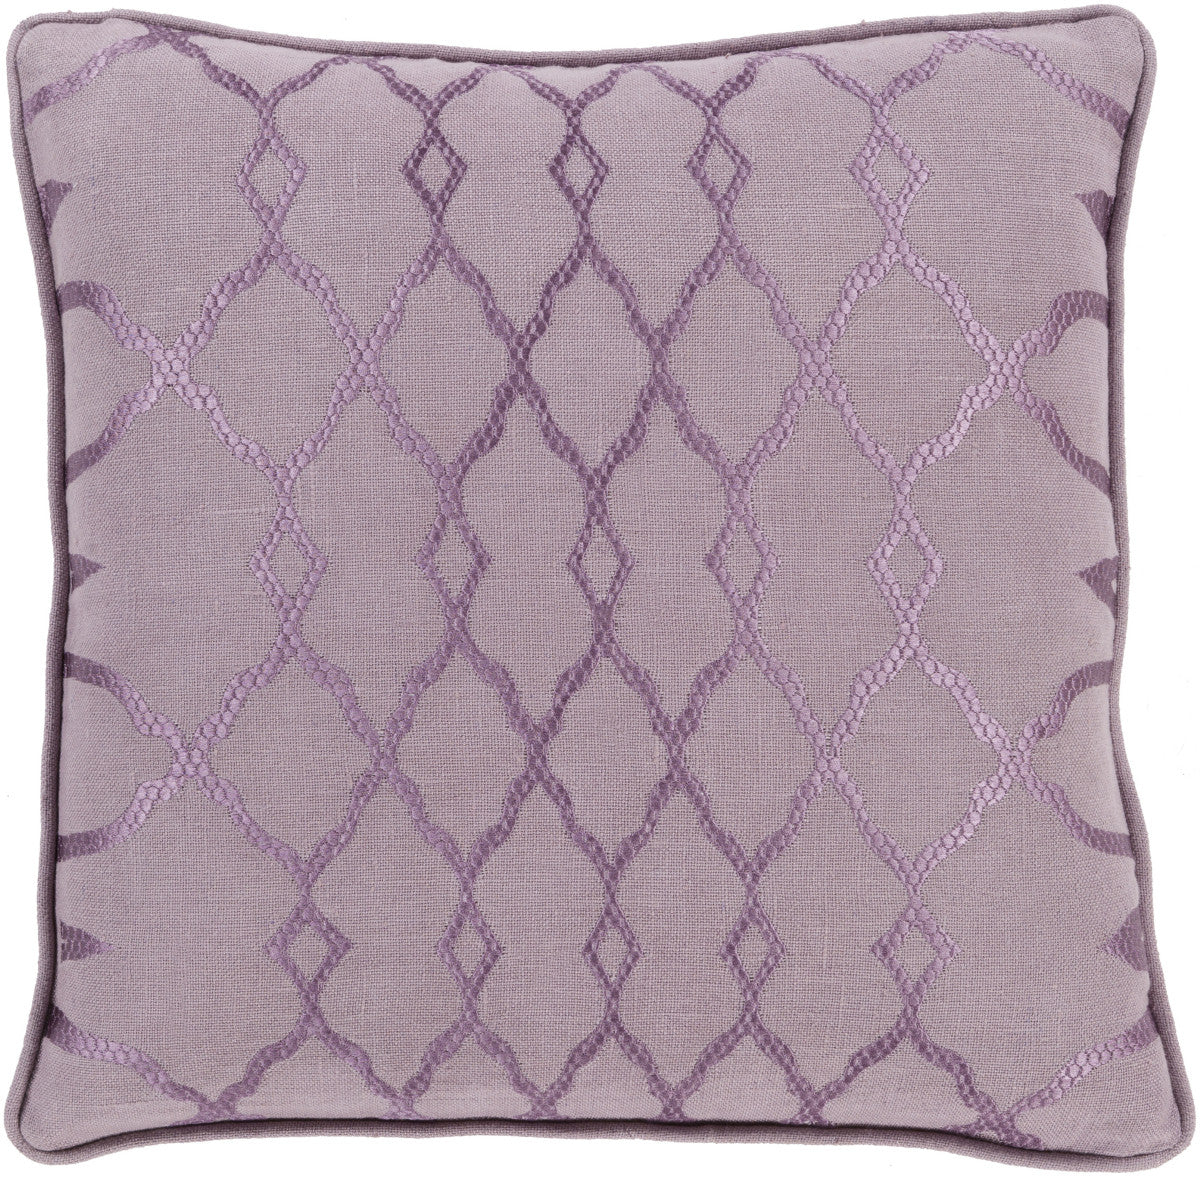 Surya Lydia Luxury in Linen LY-003 Pillow